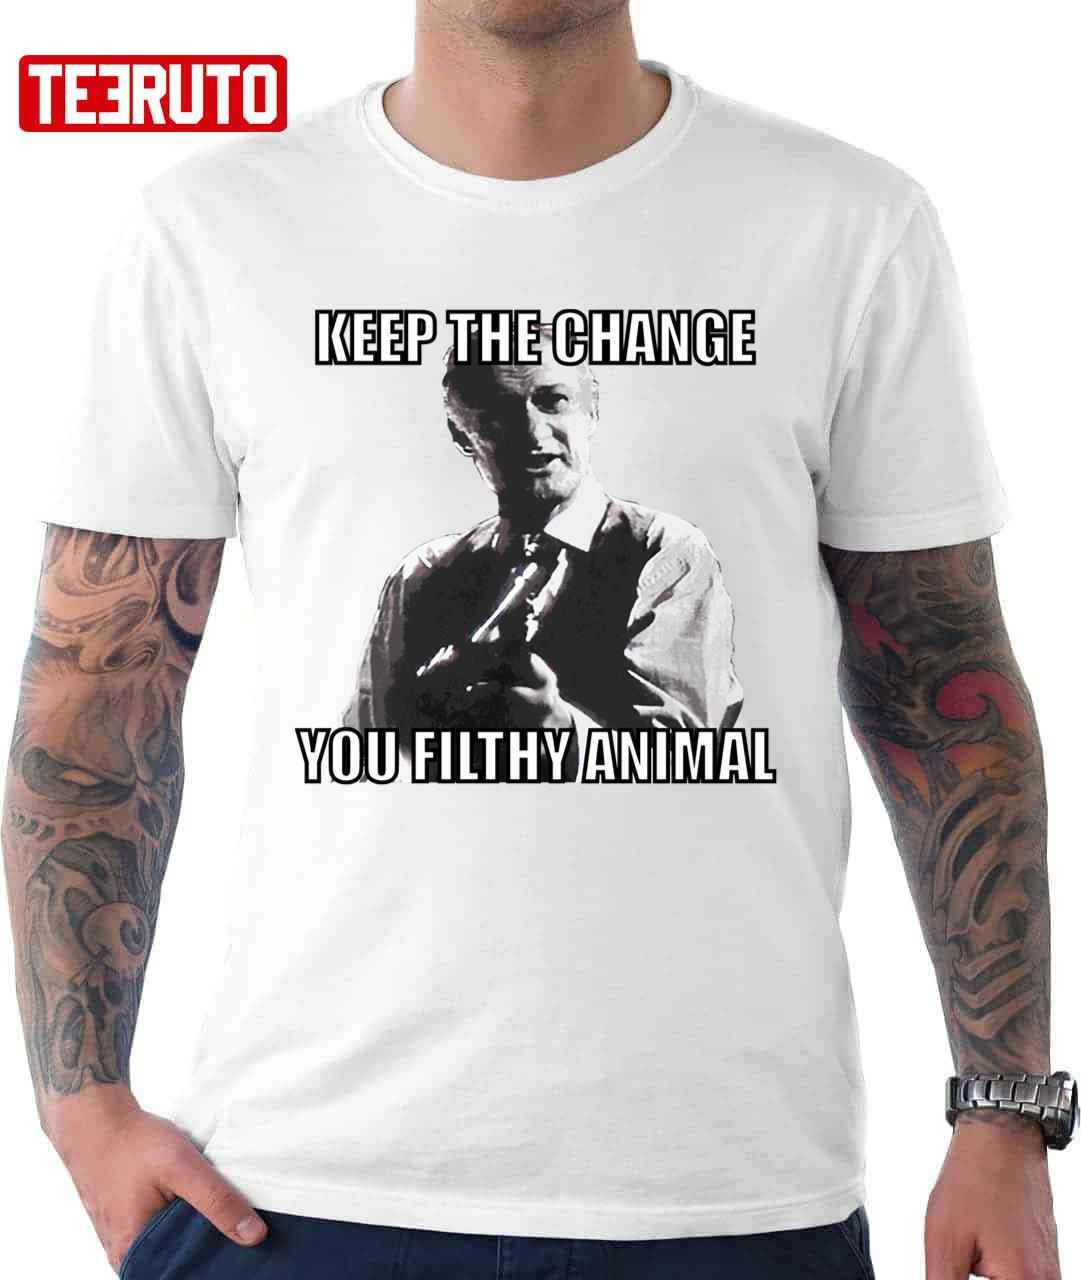 Keep The Change You Filthy Animal Home Alone All Time Low Unisex T-shirt -  Teeruto